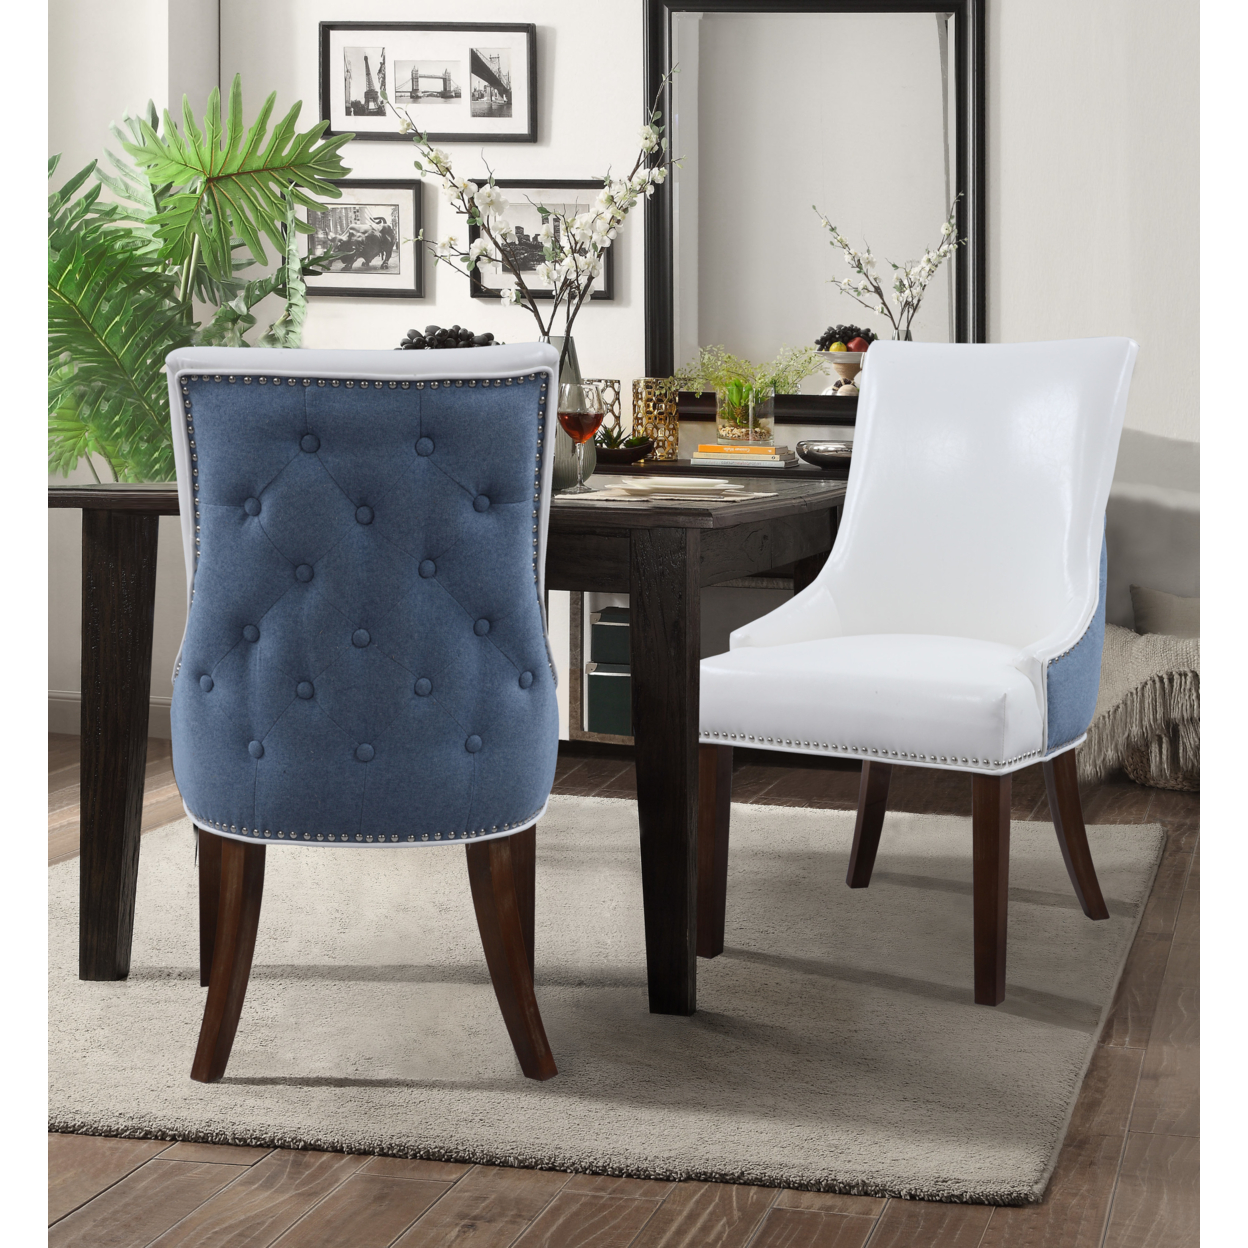 Taylor PU Leather Dining Chair, Set Of 2, Linen Button Tufted With Silver Nailhead Solid Birch Legs - White